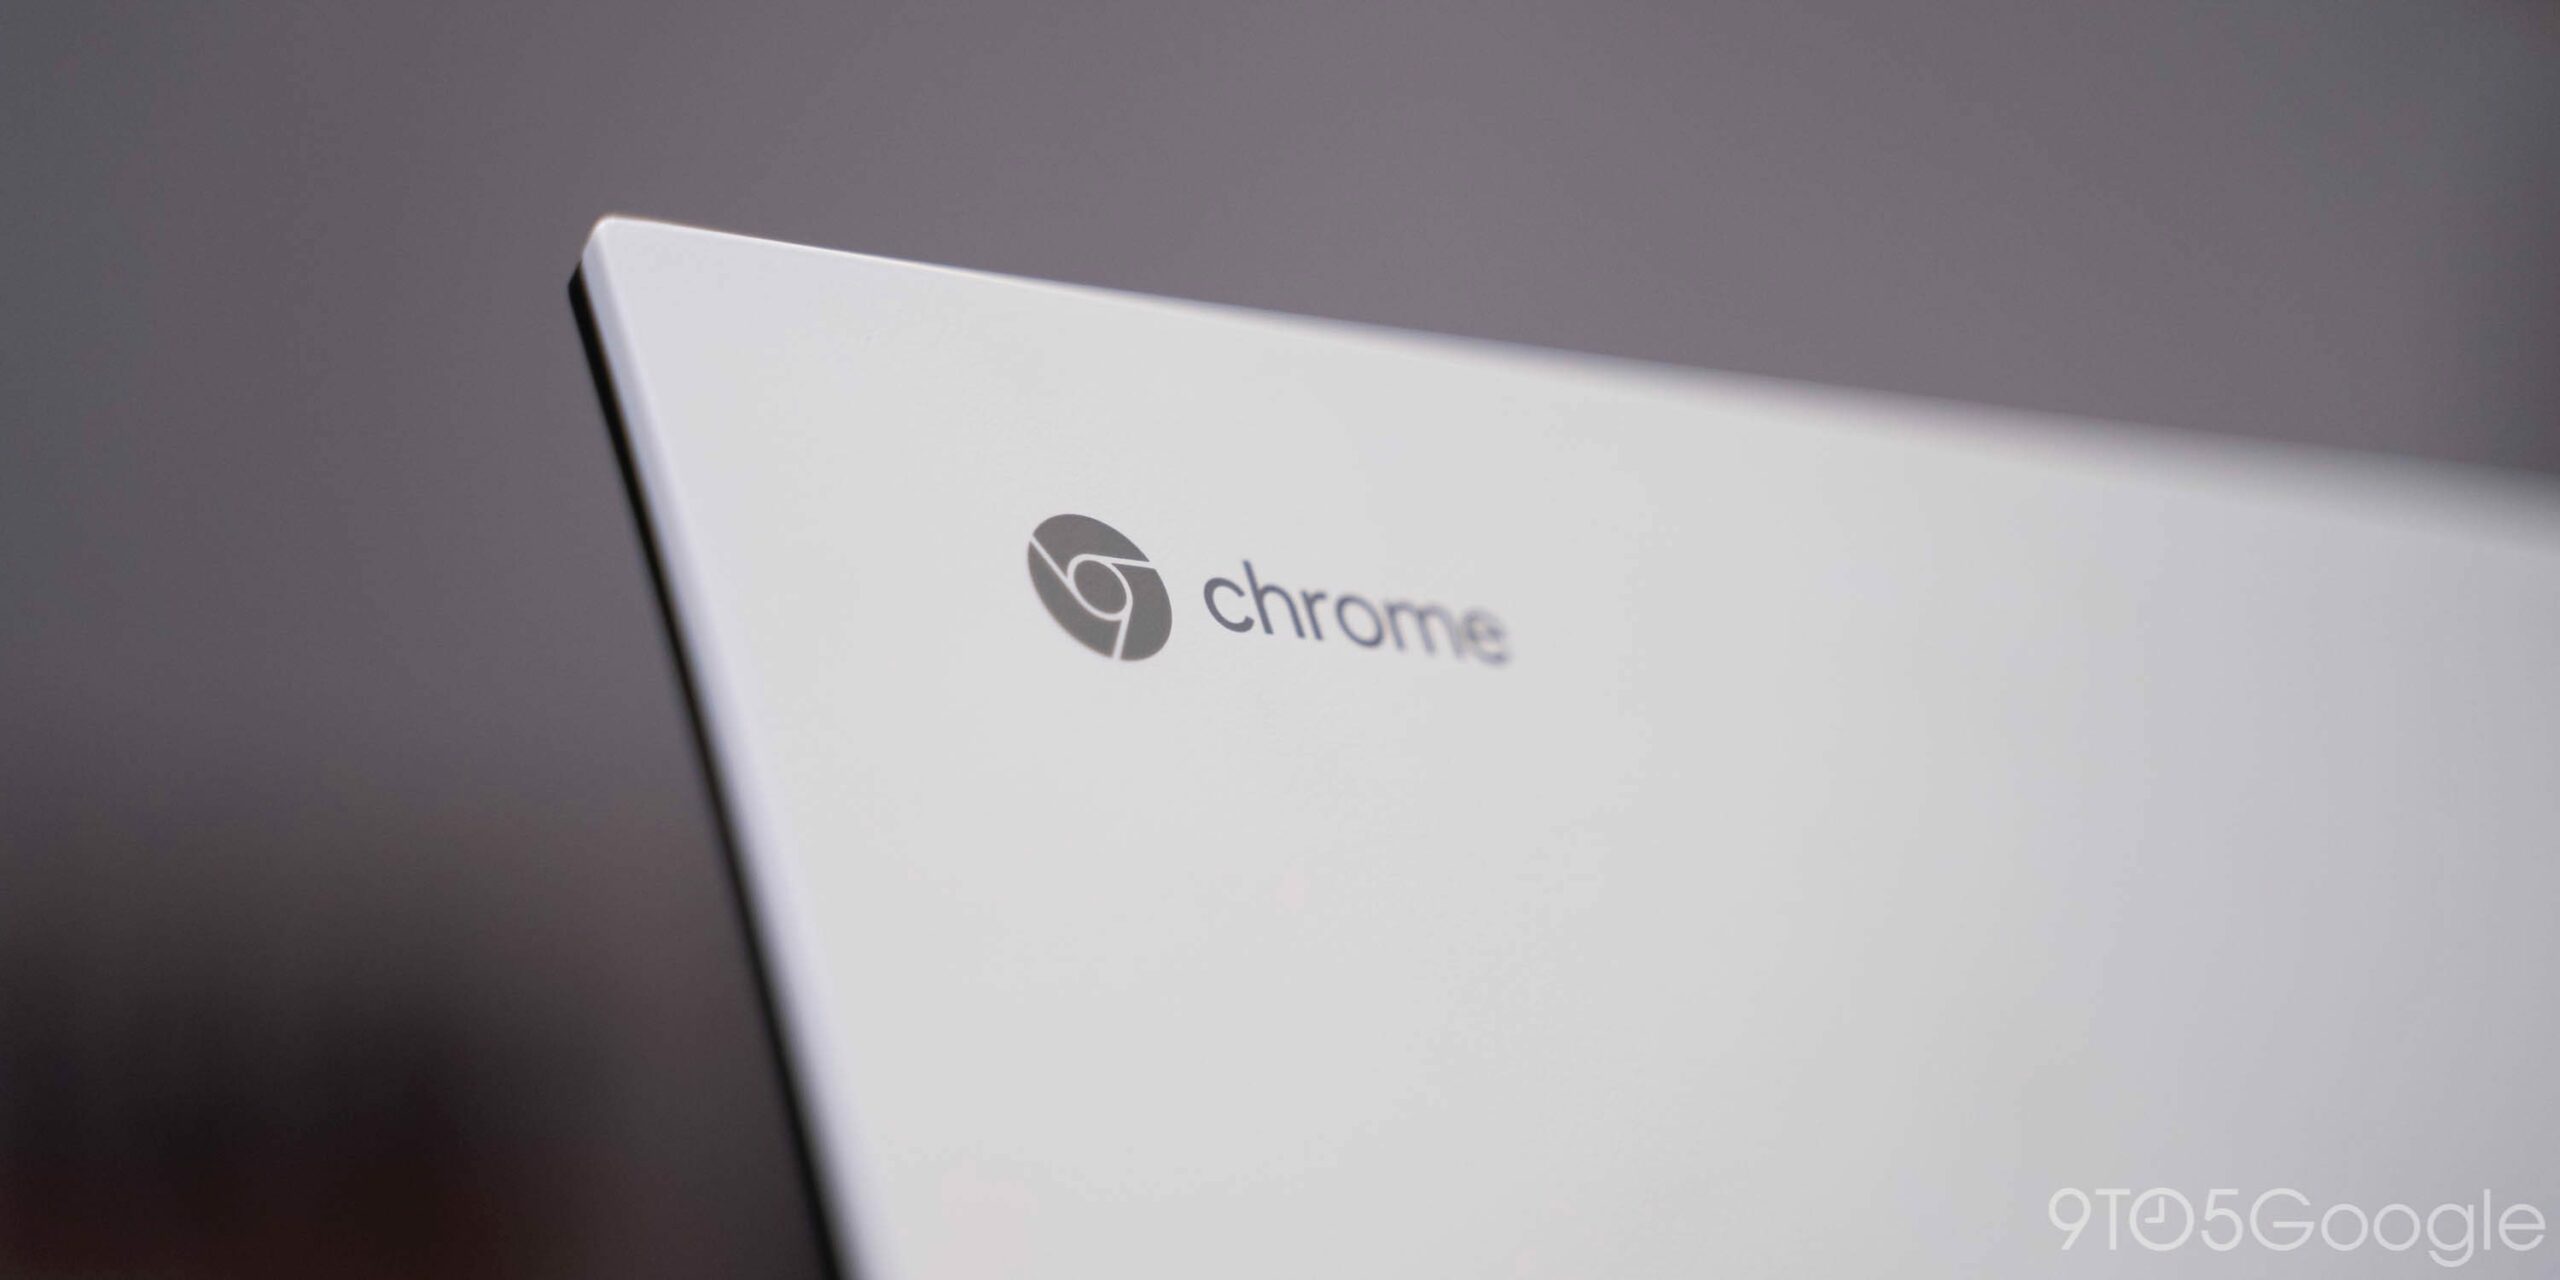 Windows apps on Chrome OS detailed w/ Parallels needs